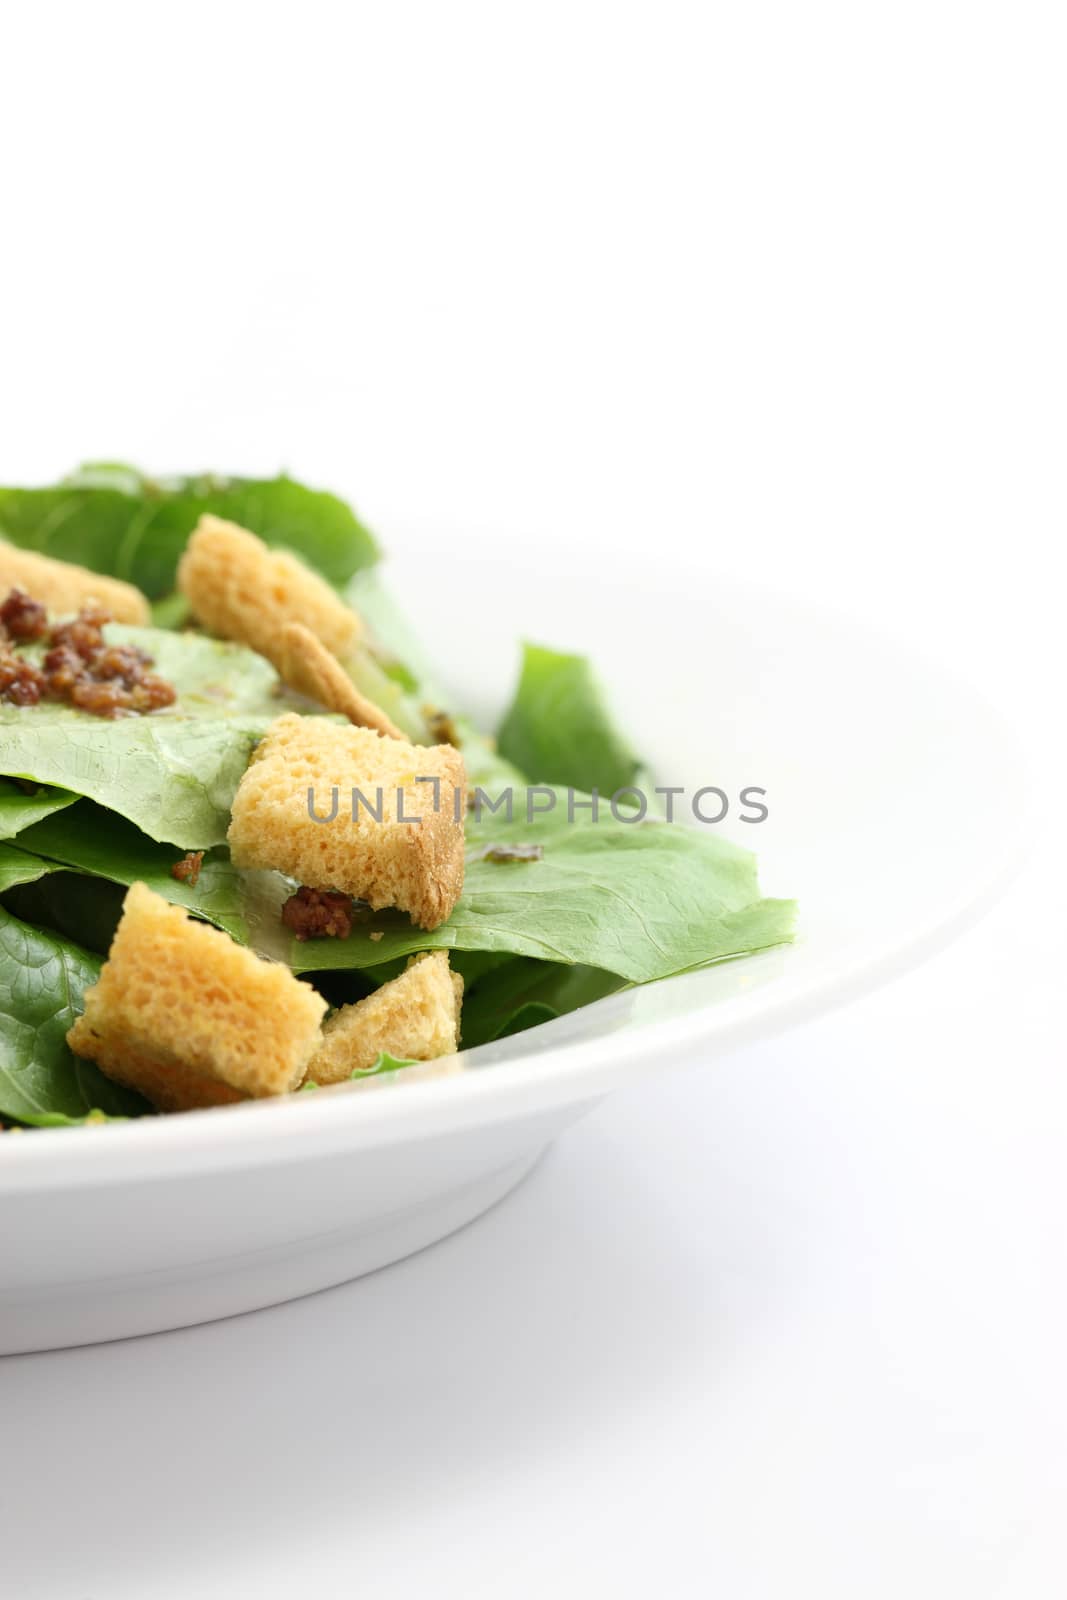 Salad isolated in white background by piyato